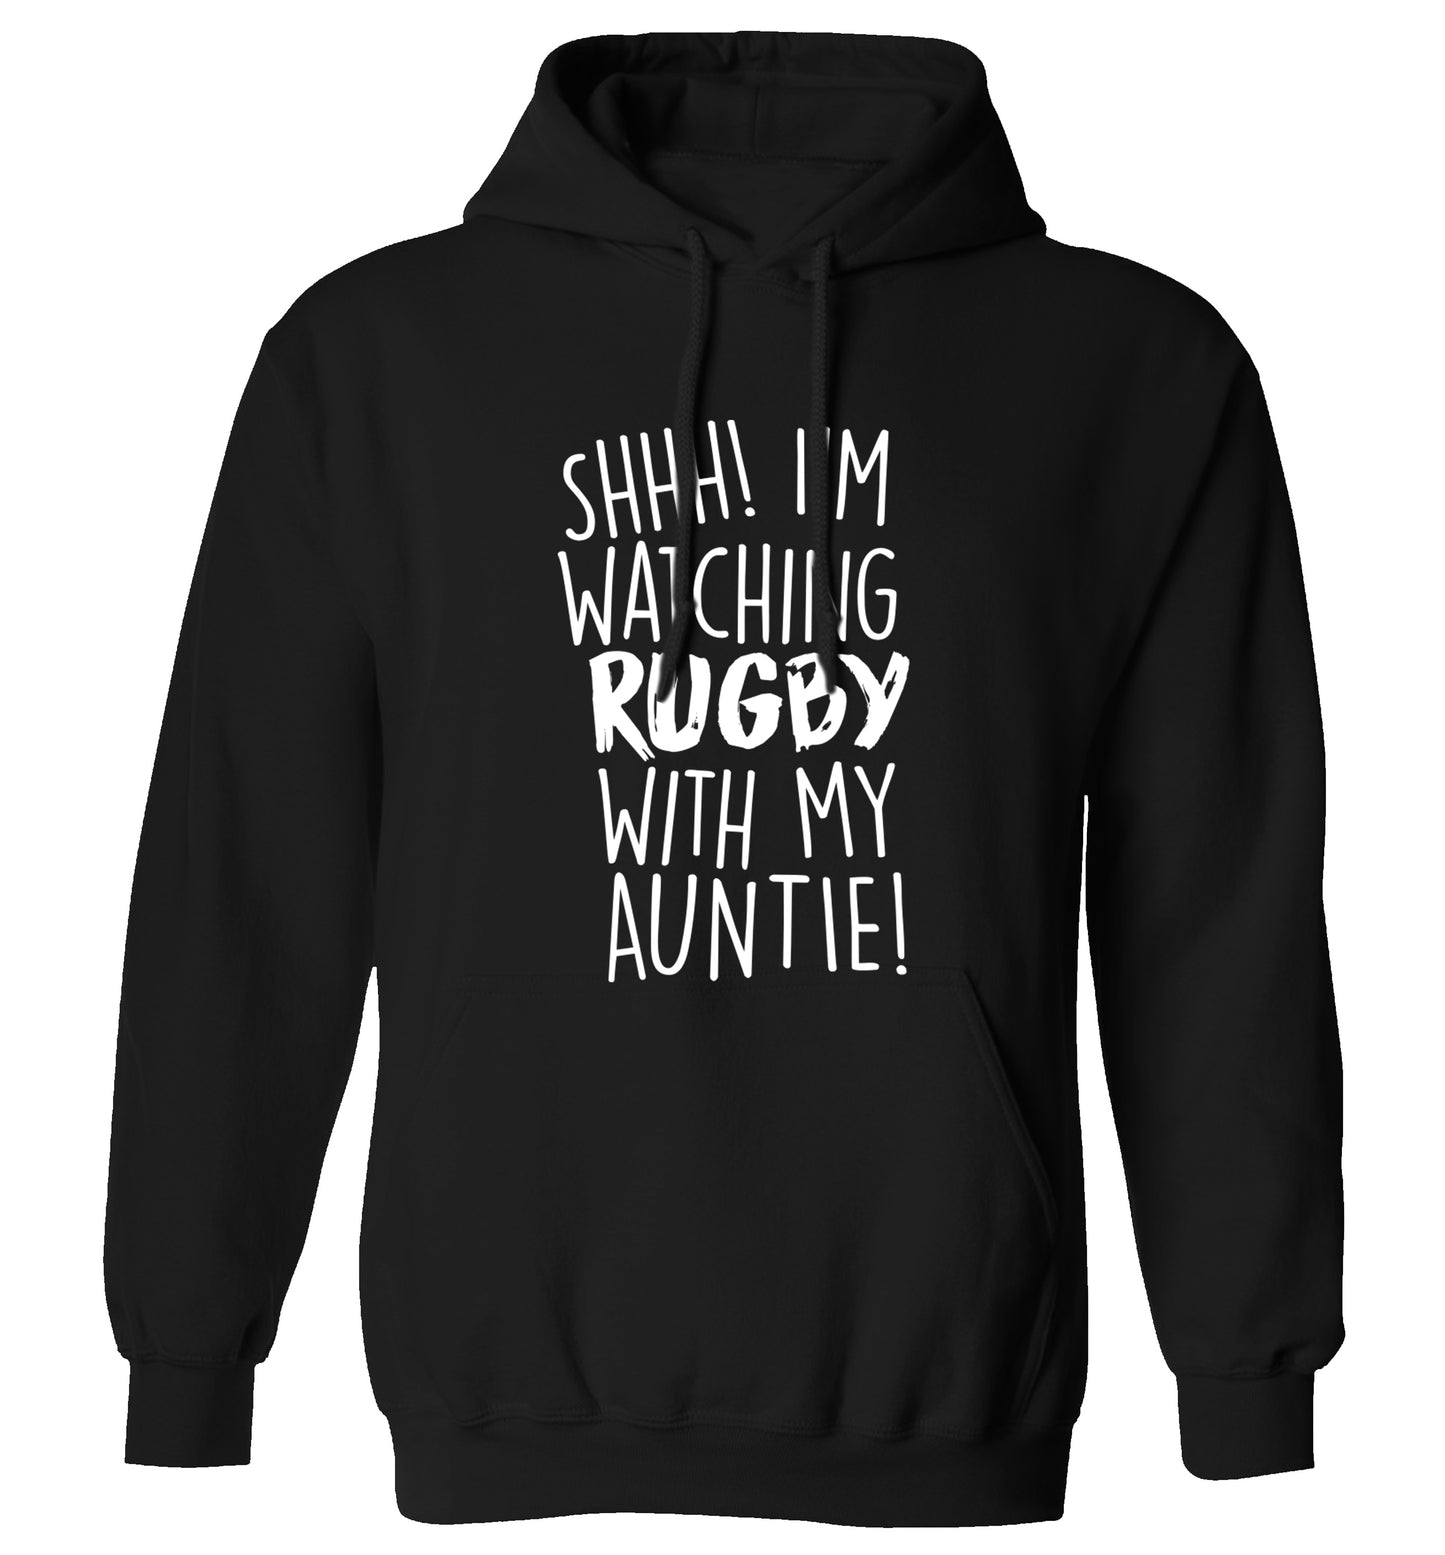 Shhh I'm watchin rugby with my auntie adults unisex black hoodie 2XL